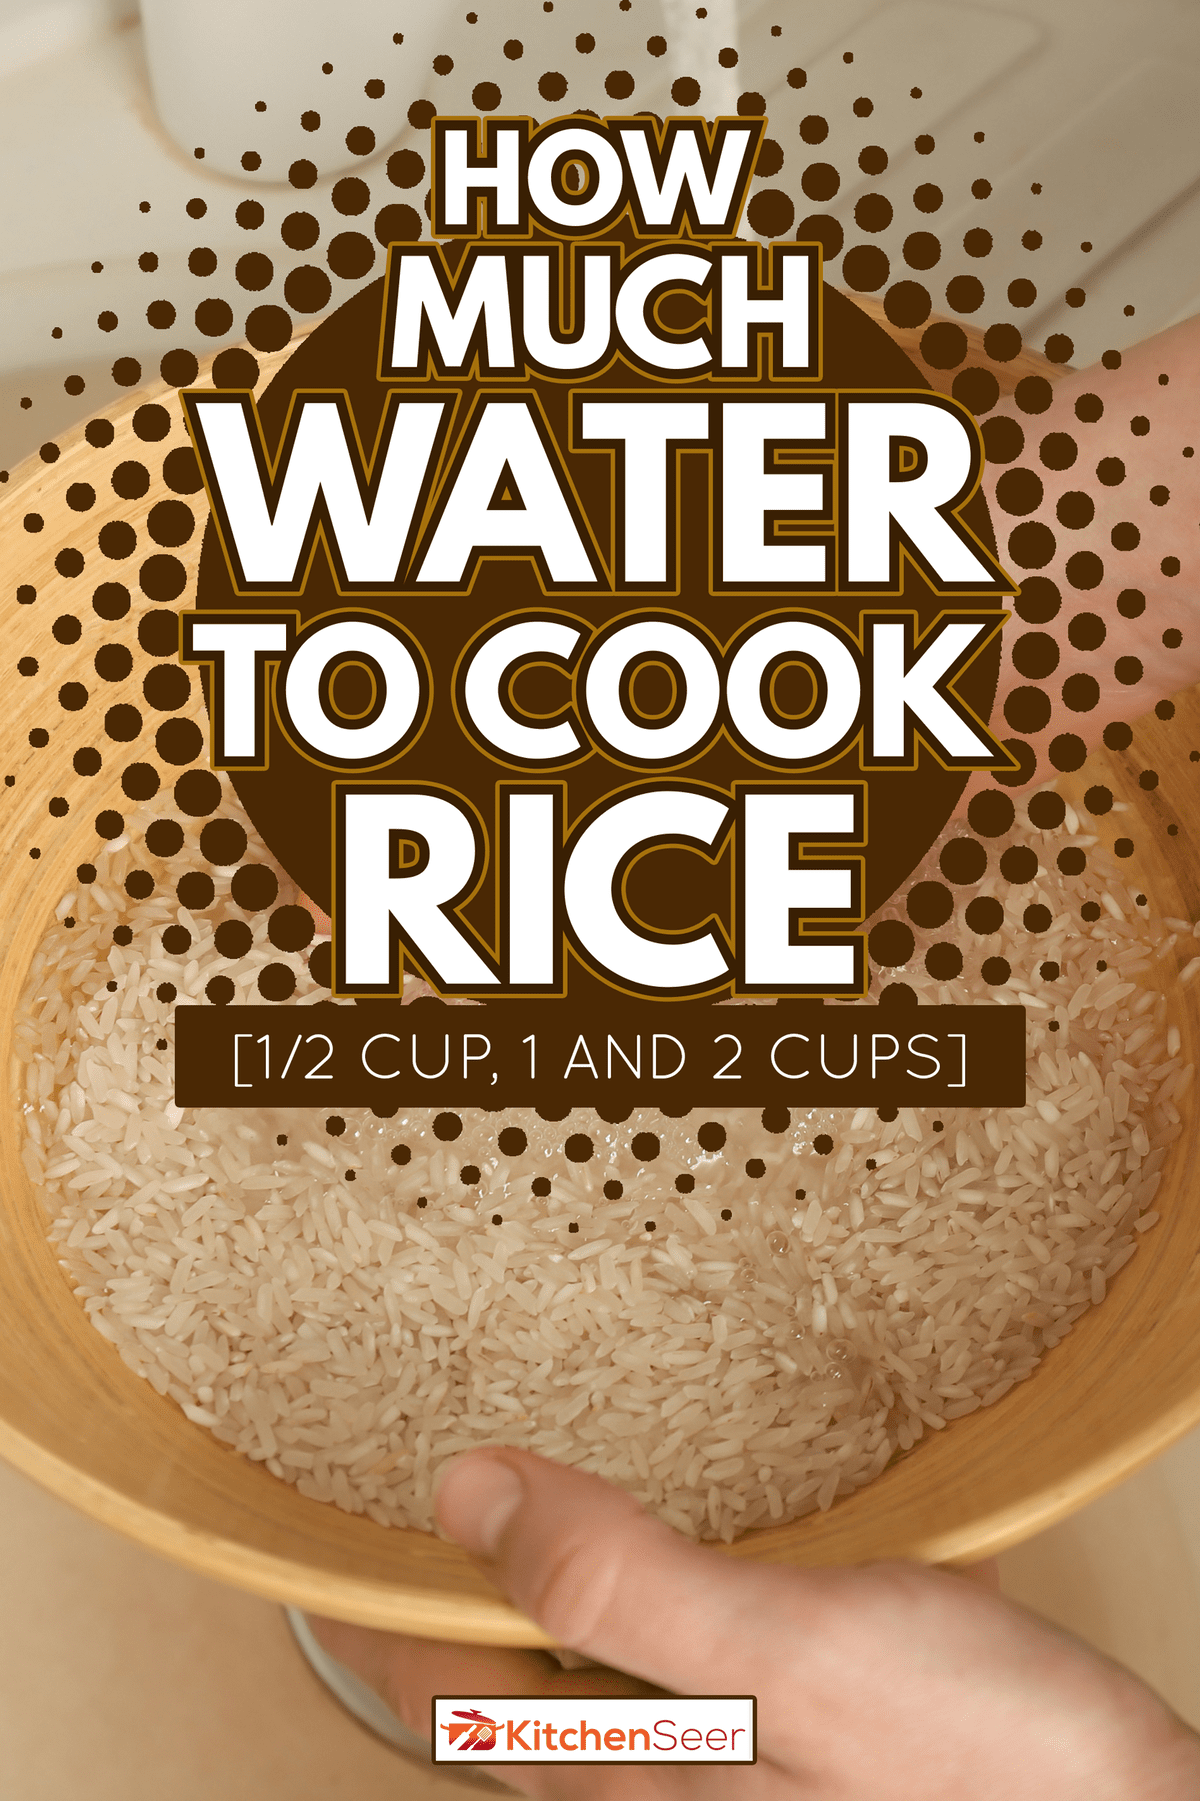 Woman rinsing rice in bowl under running water - How Much Water To Cook Rice [1 2 Cup, 1 And 2 Cups]